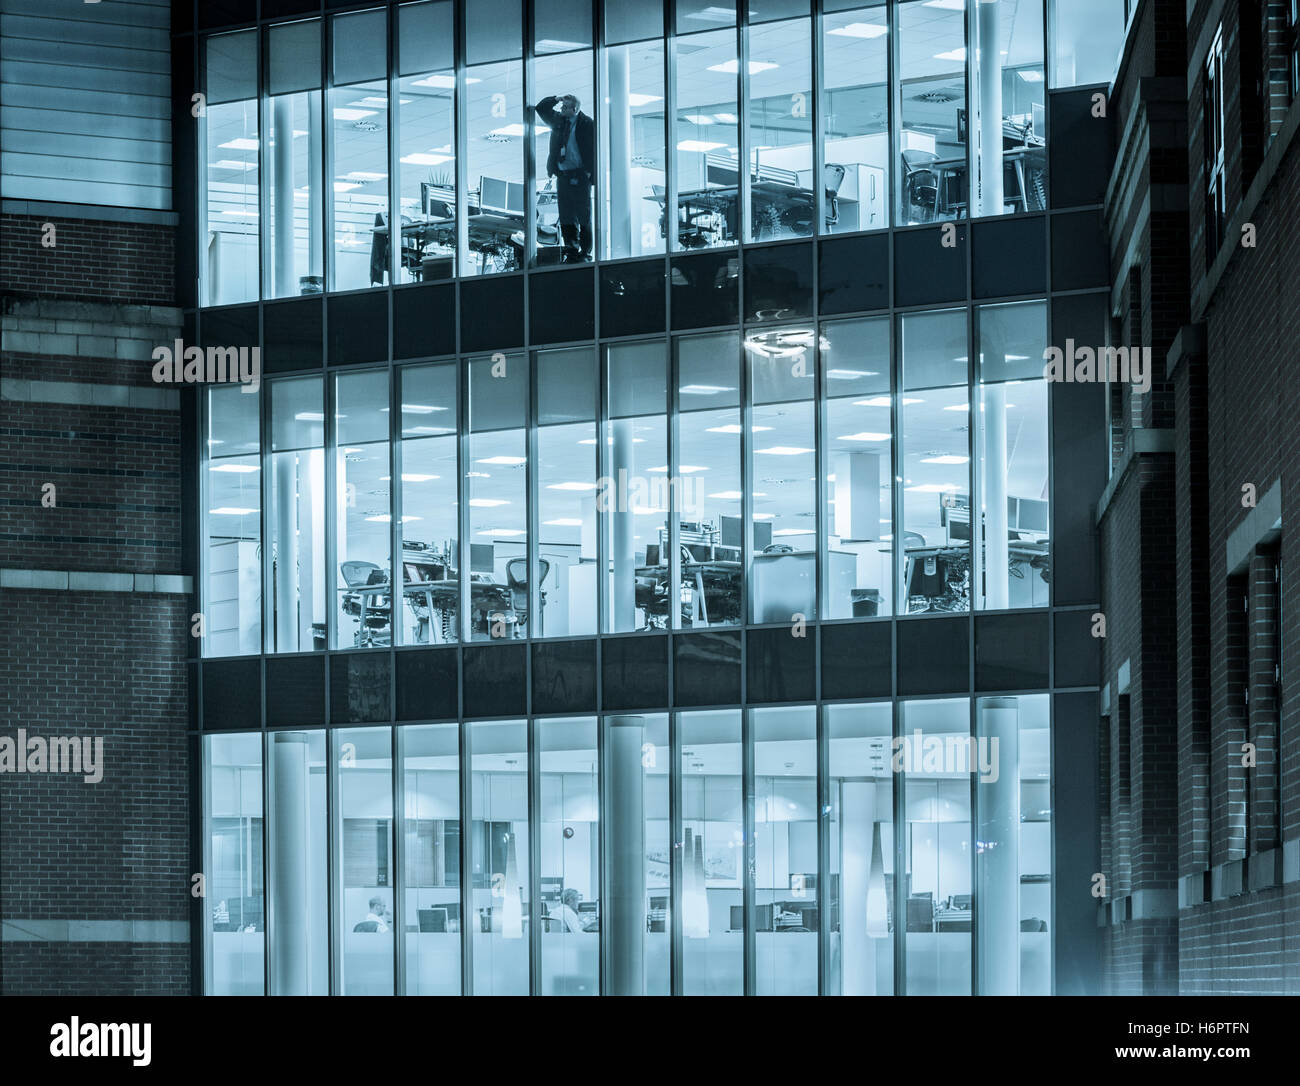 Man alone in office looking out of window at night: energy saving, working from home workplace stress, mental health, loneliness...concept. Stock Photo